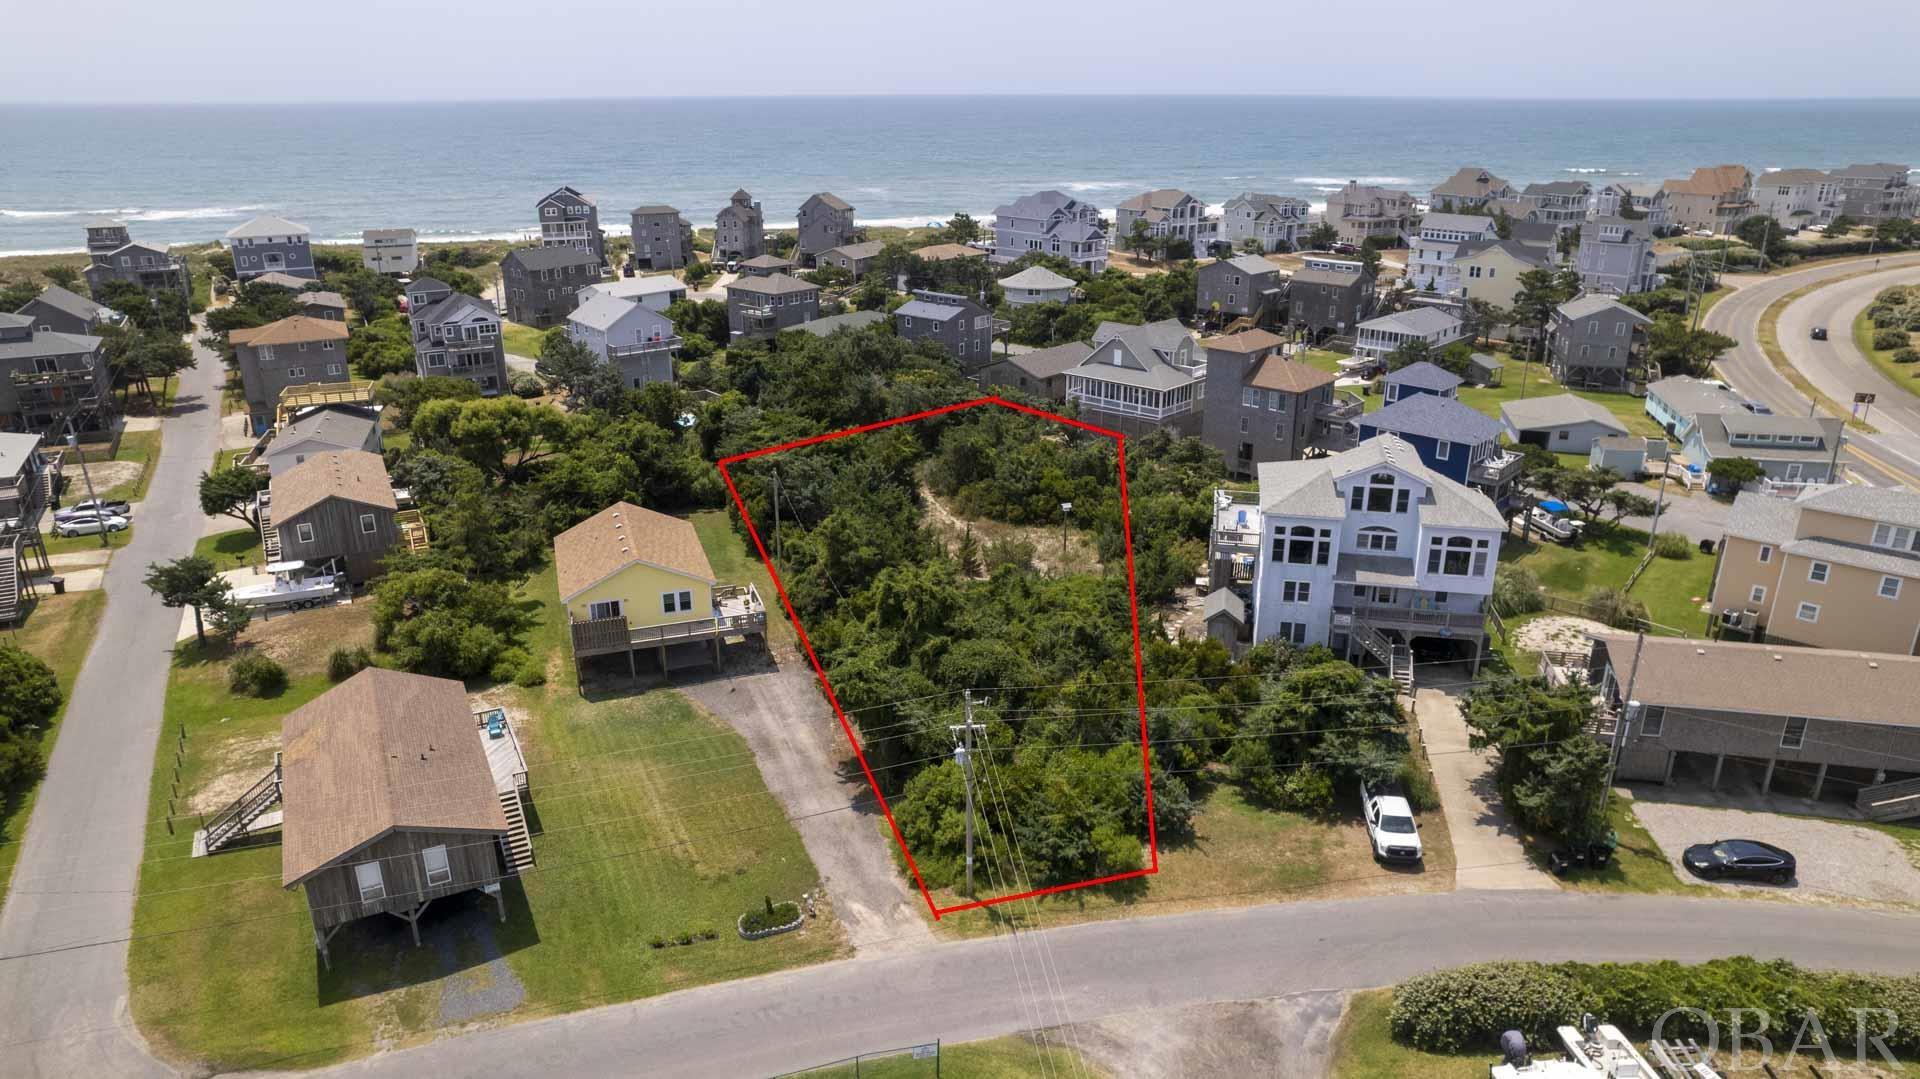 58212 Woodall Way, Hatteras, NC 27943, ,Lots/land,For sale,Woodall Way,126168